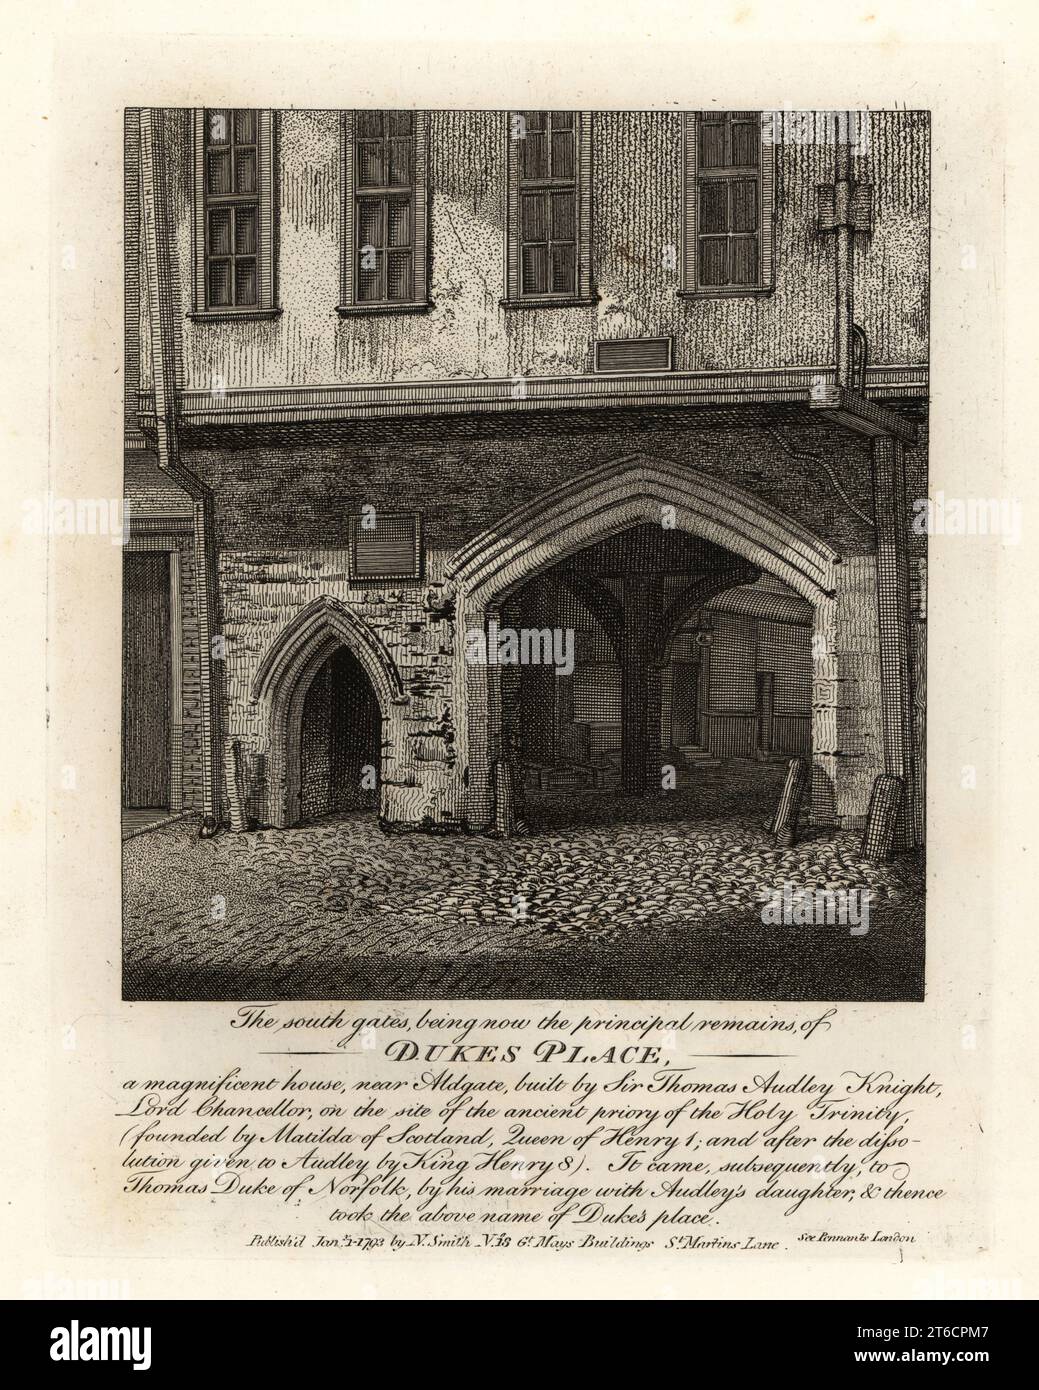 The ruins of the South Gates of Dukes Place, built by Sir Thomas Audley (1488-1544) near Aldgate. Copperplate engraving by John Thomas Smith after original drawings by members of the Society of Antiquaries from his J.T. Smiths Antiquities of London and its Environs, J. Sewell, R. Folder, J. Simco, London, 1793. Stock Photo